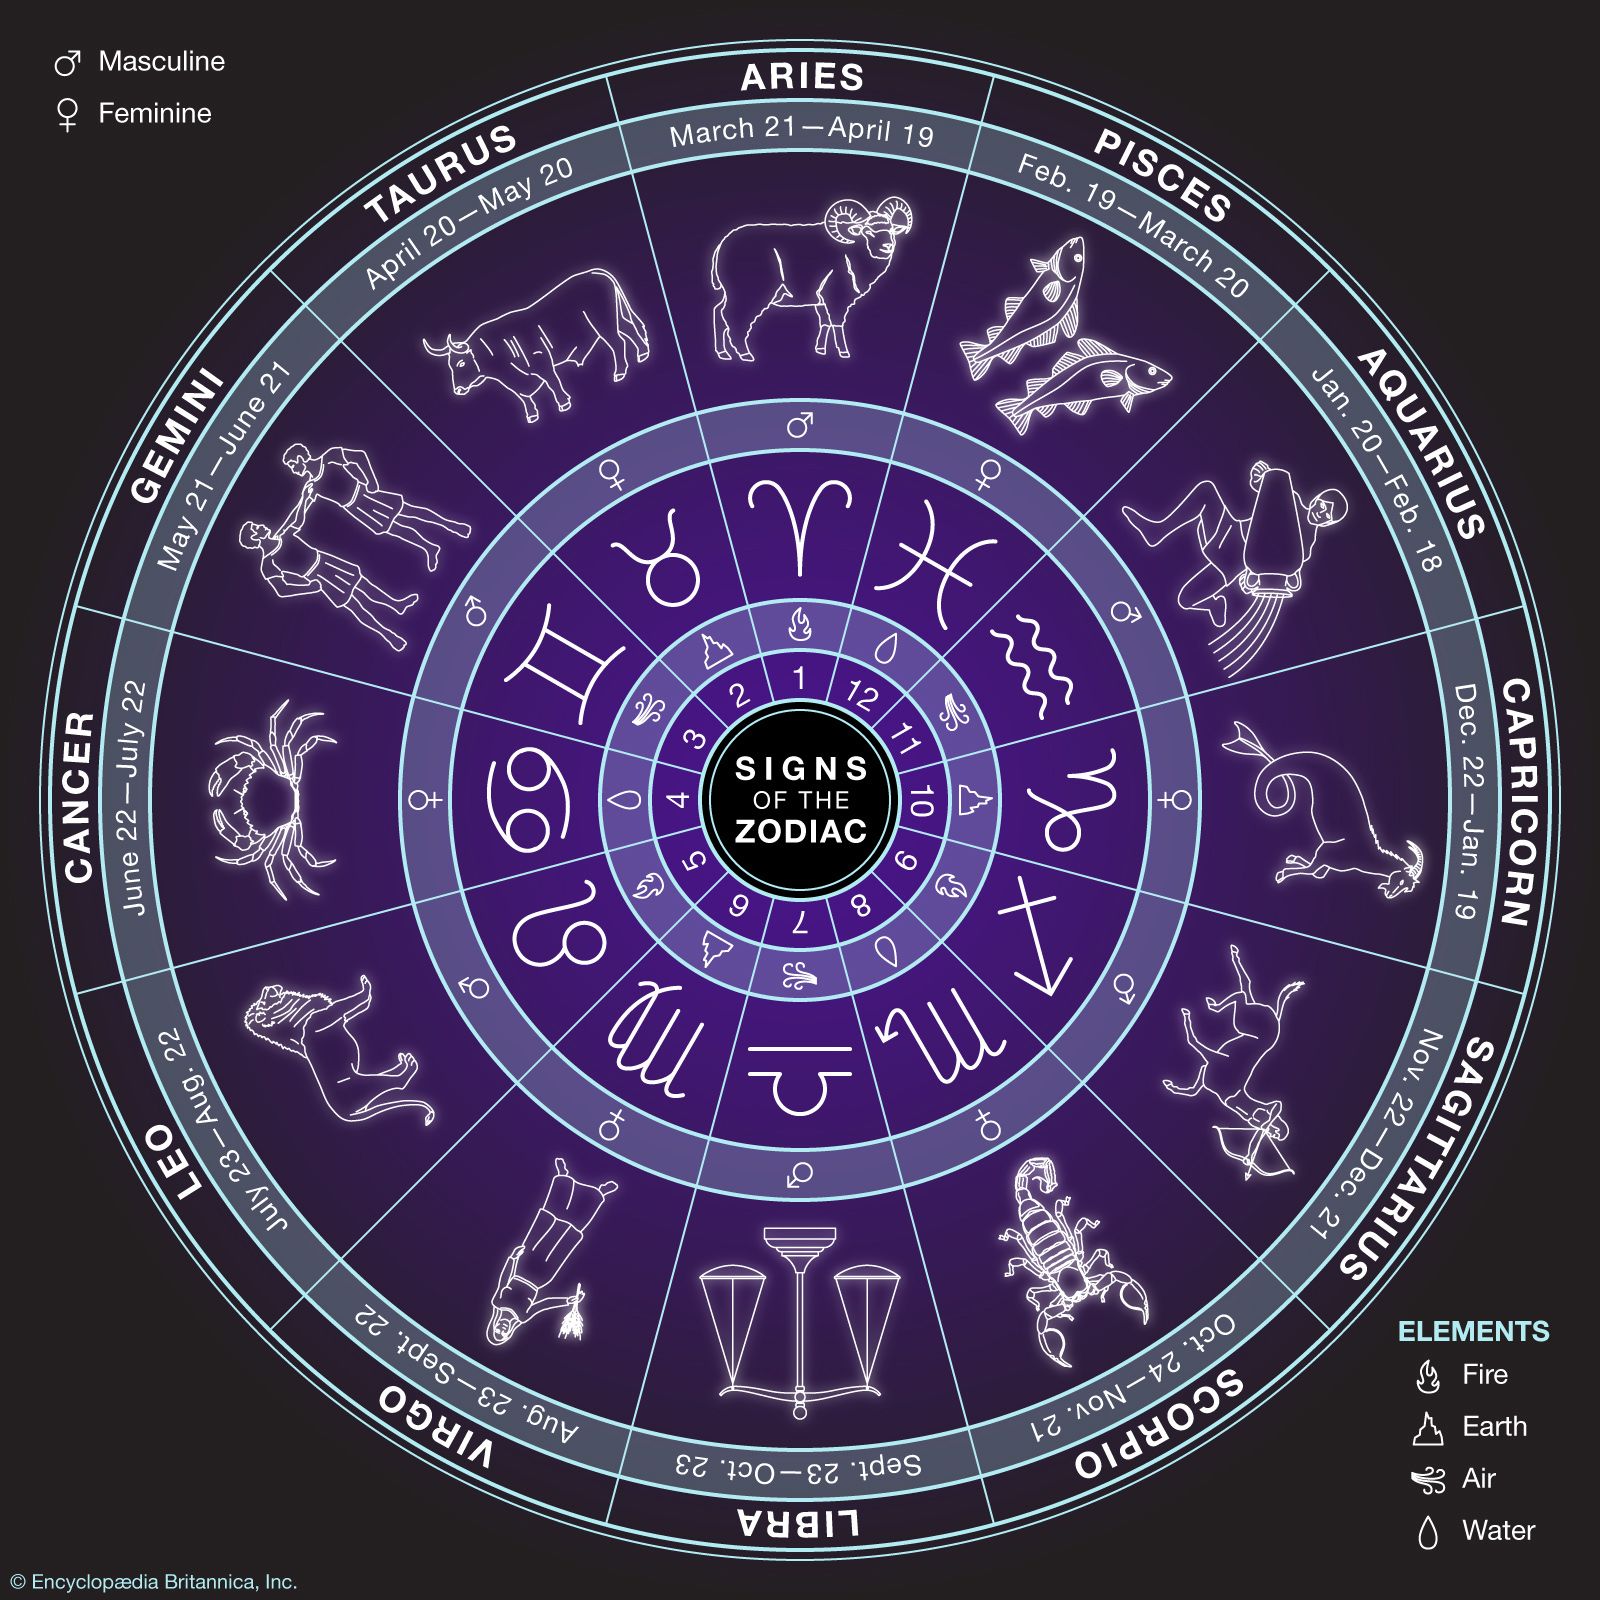 What The Zodiac Signs Represent